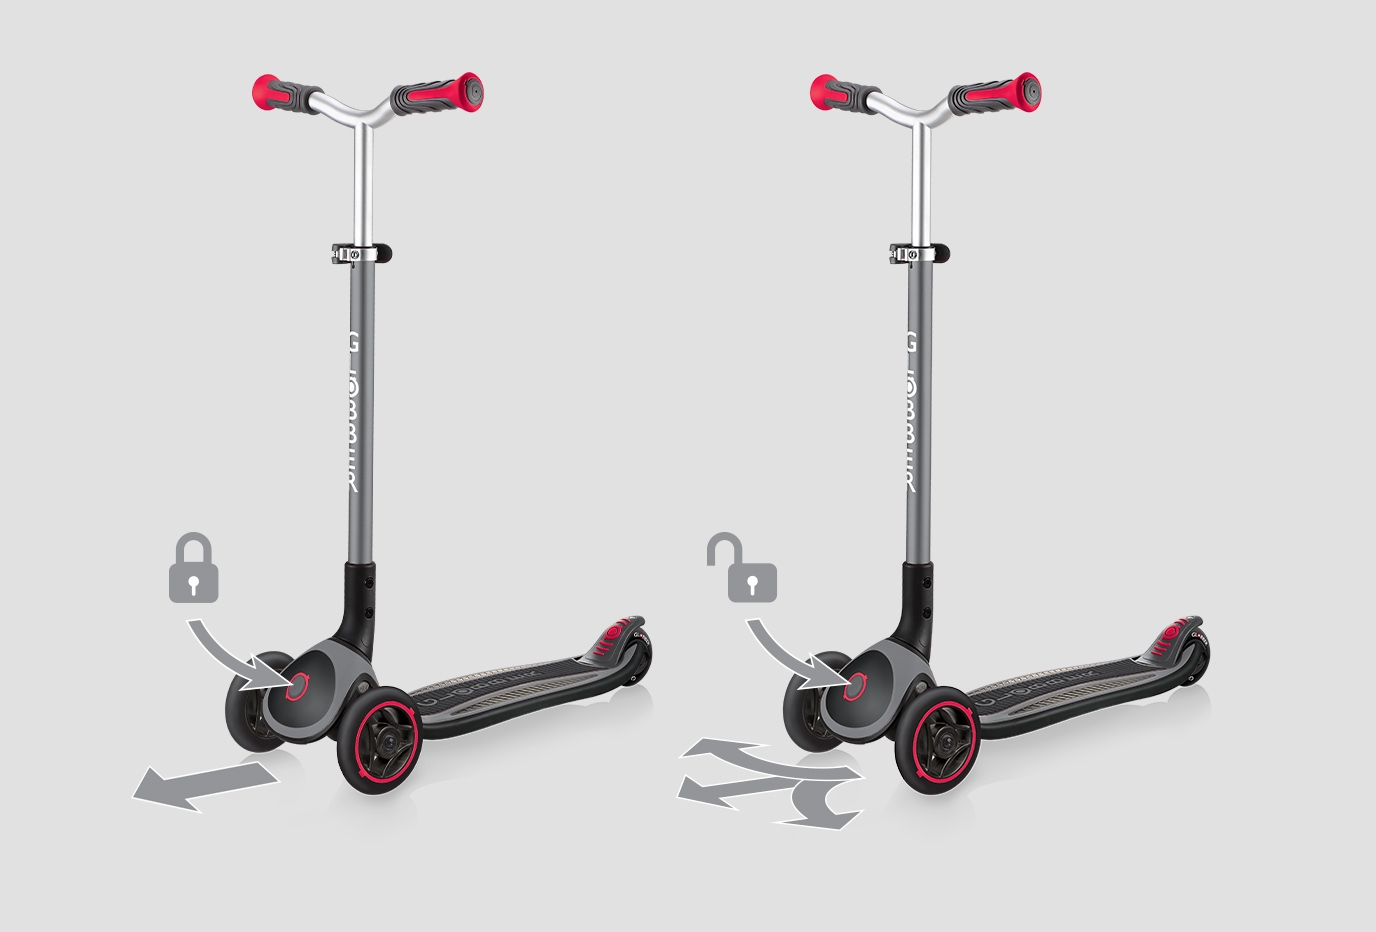 Black 3-wheel scooters for kids and teens with a patented steering lock system